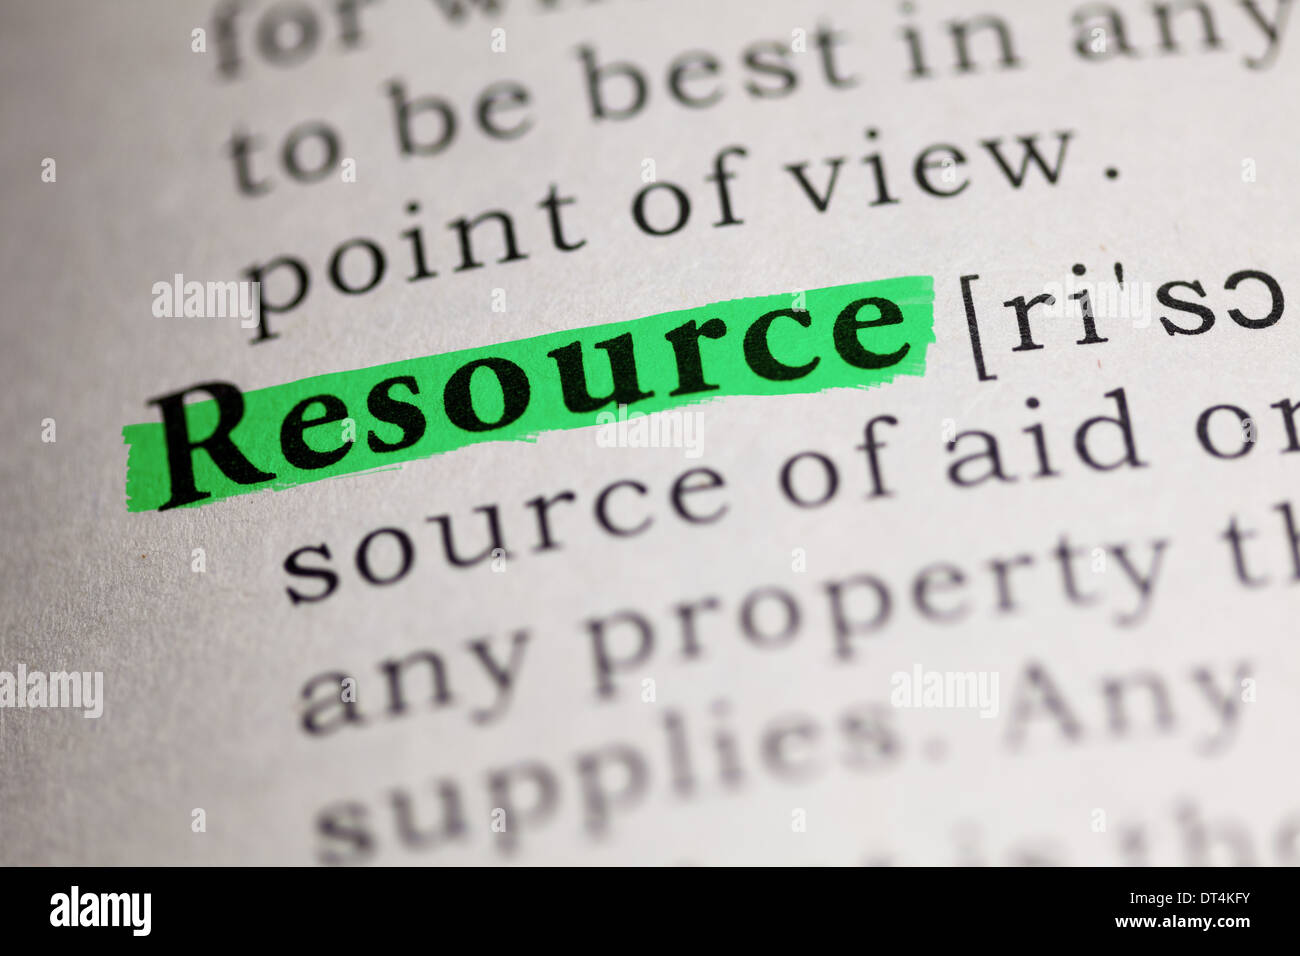 Fake Dictionary, Dictionary definition of the word Resource. Stock Photo